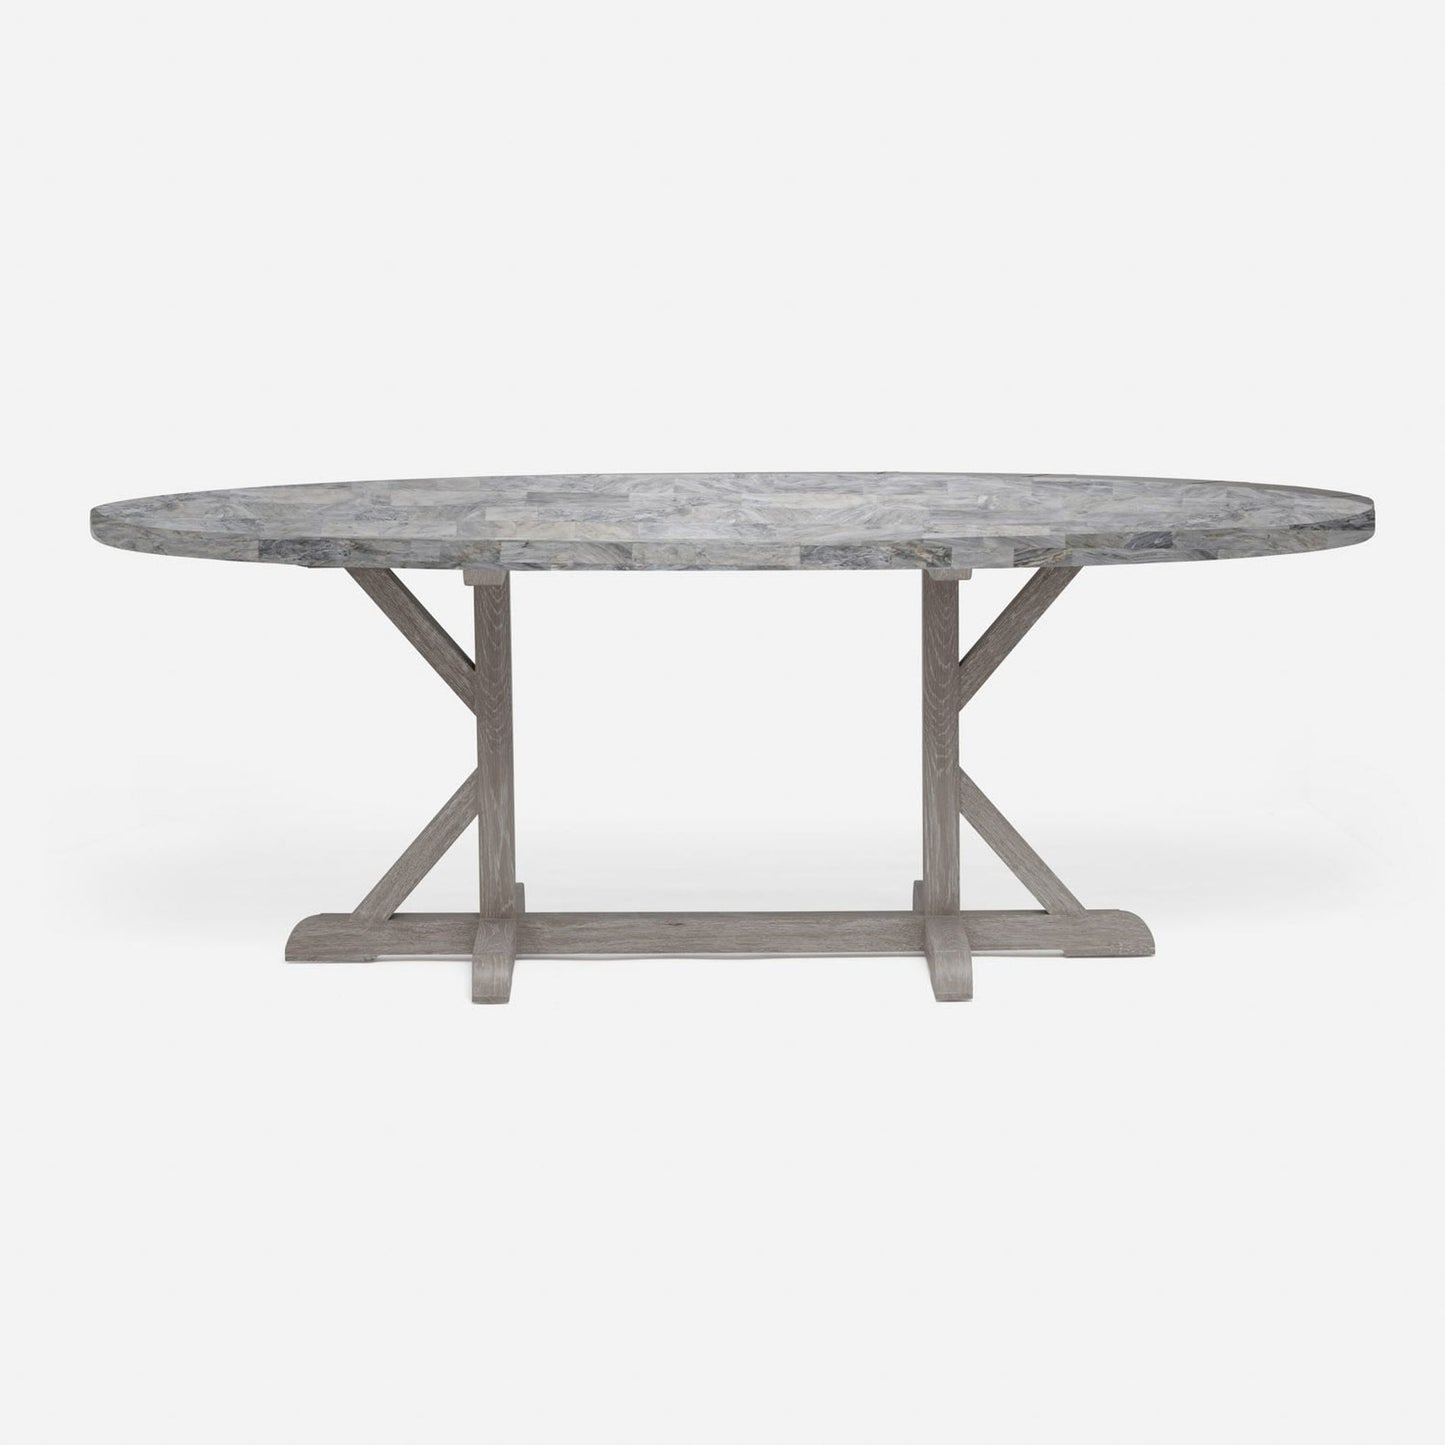 Made Goods Dane 96" x 44" x 30" Gray Cerused Oak Dinning Table With Oval Gray Romblon Stone Table Top